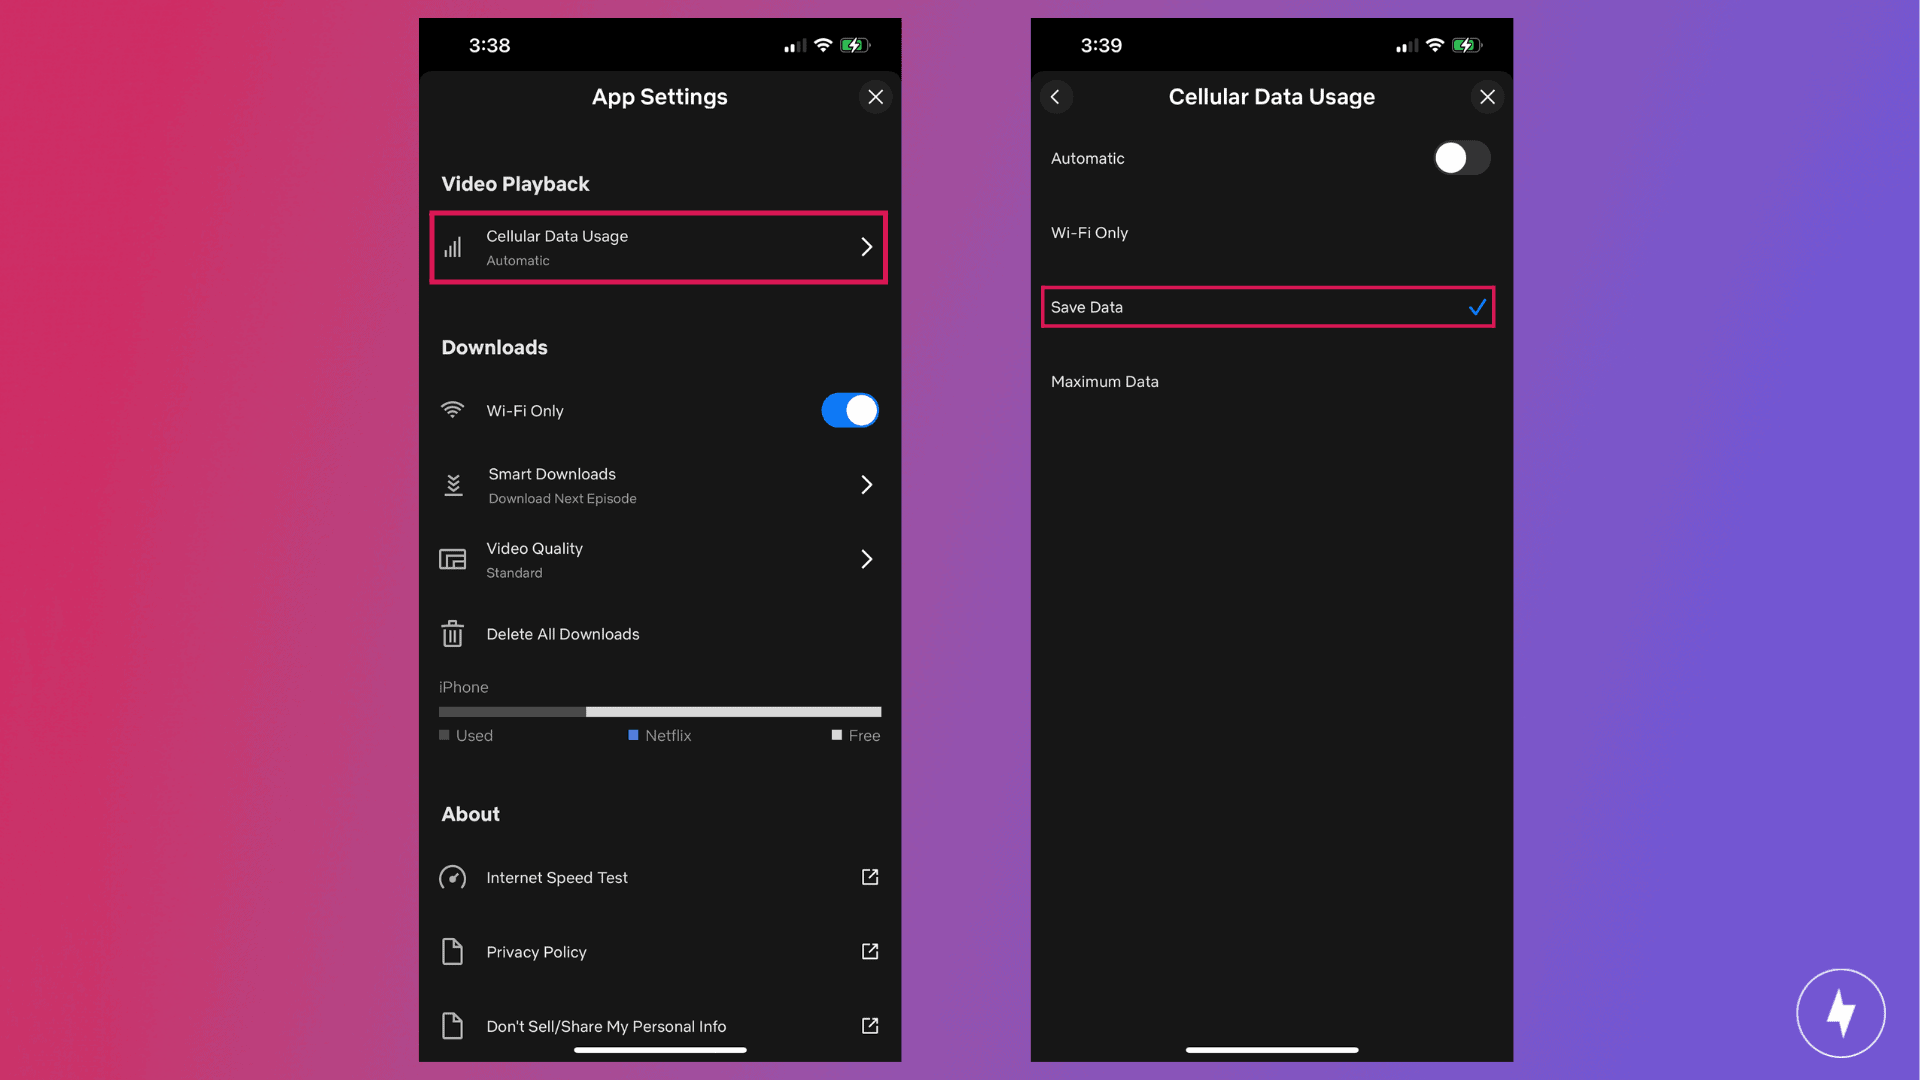 “Mobile Data Usage” settings on the iPhone Netflix app